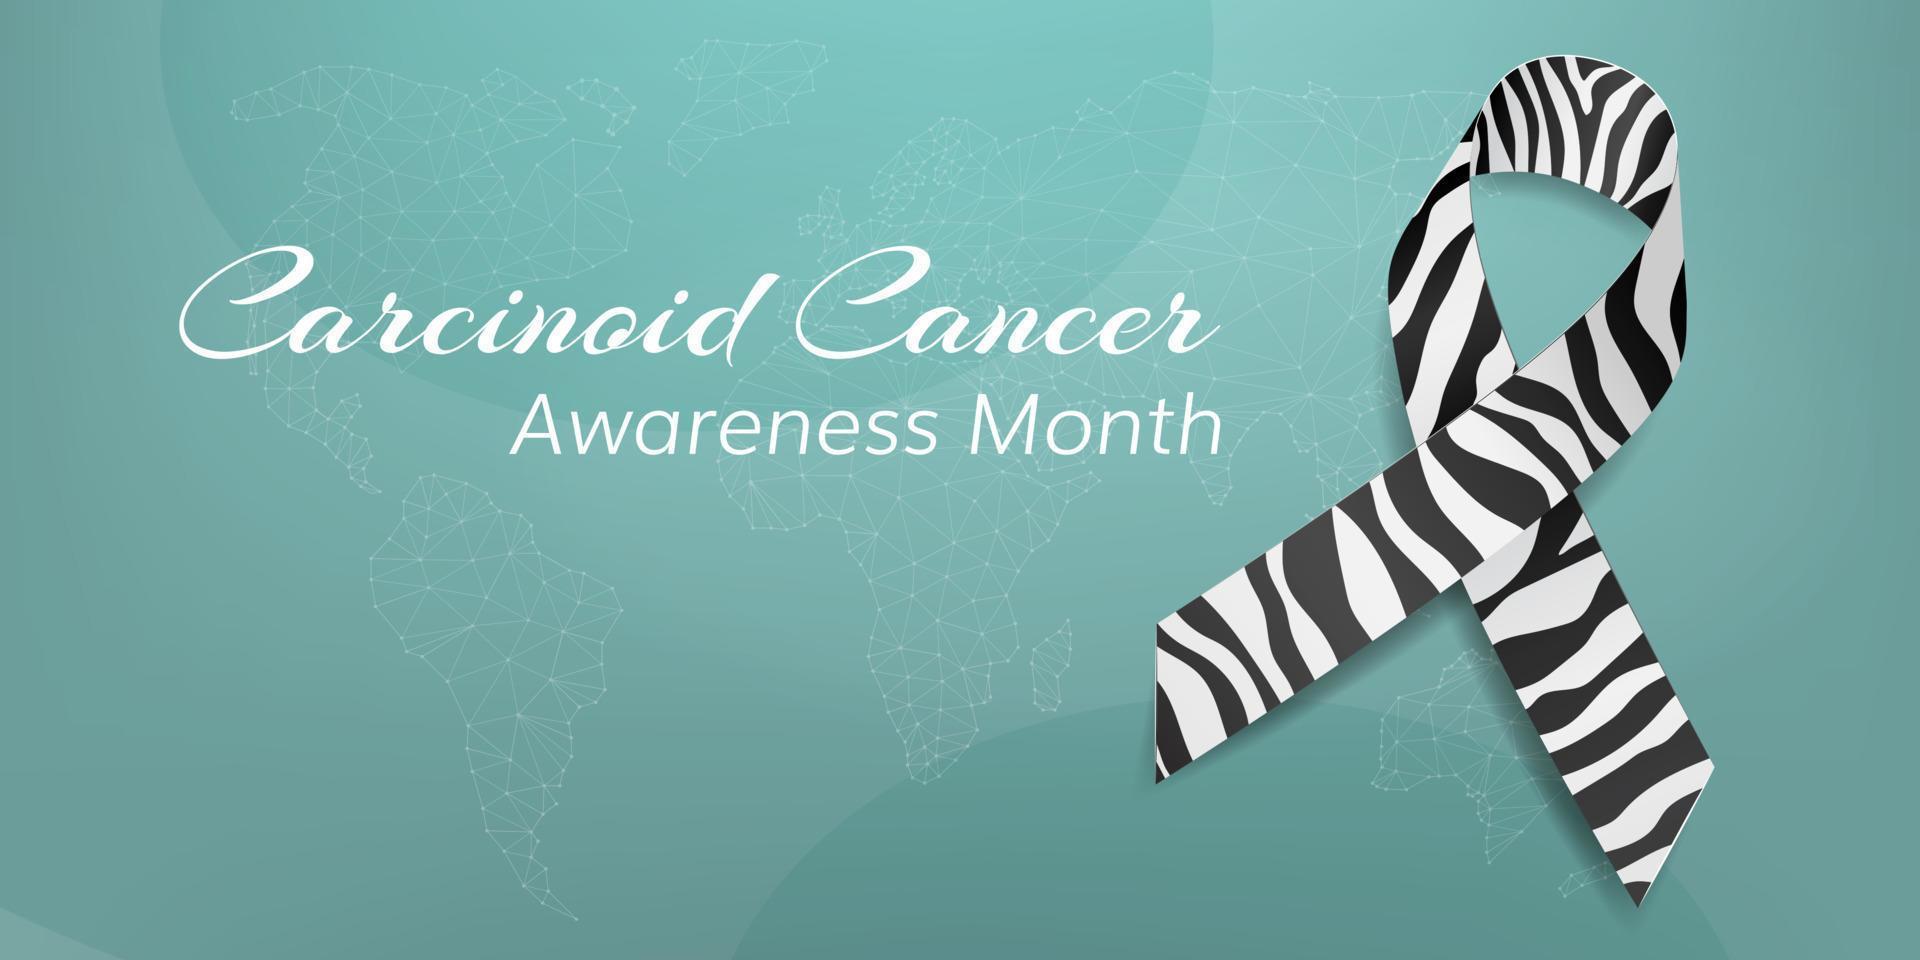 Carcinoid cancer awareness month concept. Banner template with zebra ribbon awareness and text. Vector illustration.